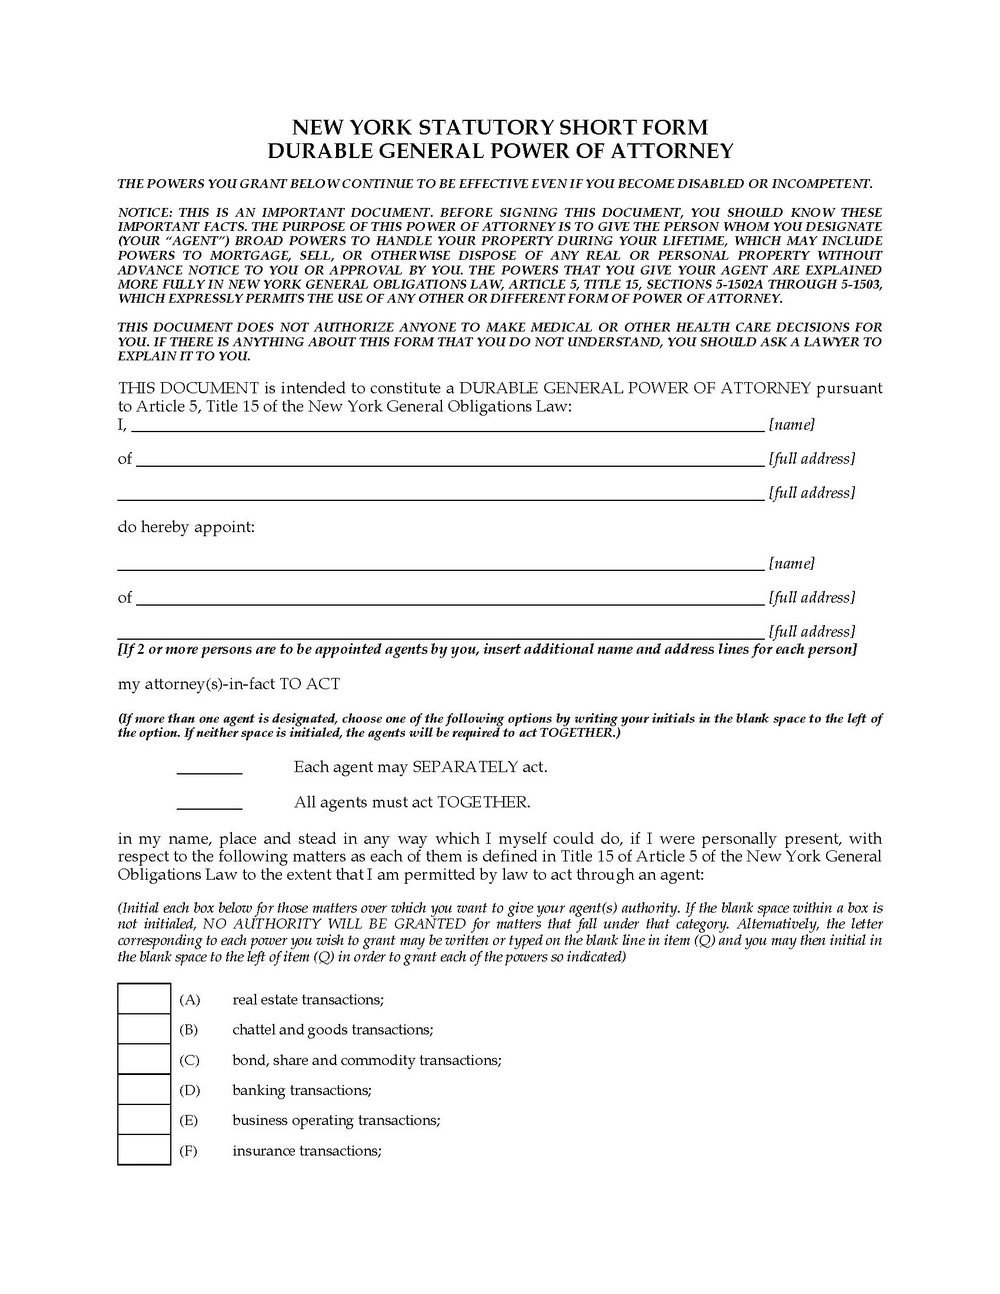 Nys Disability Form Db 450 Part C Forms 4455